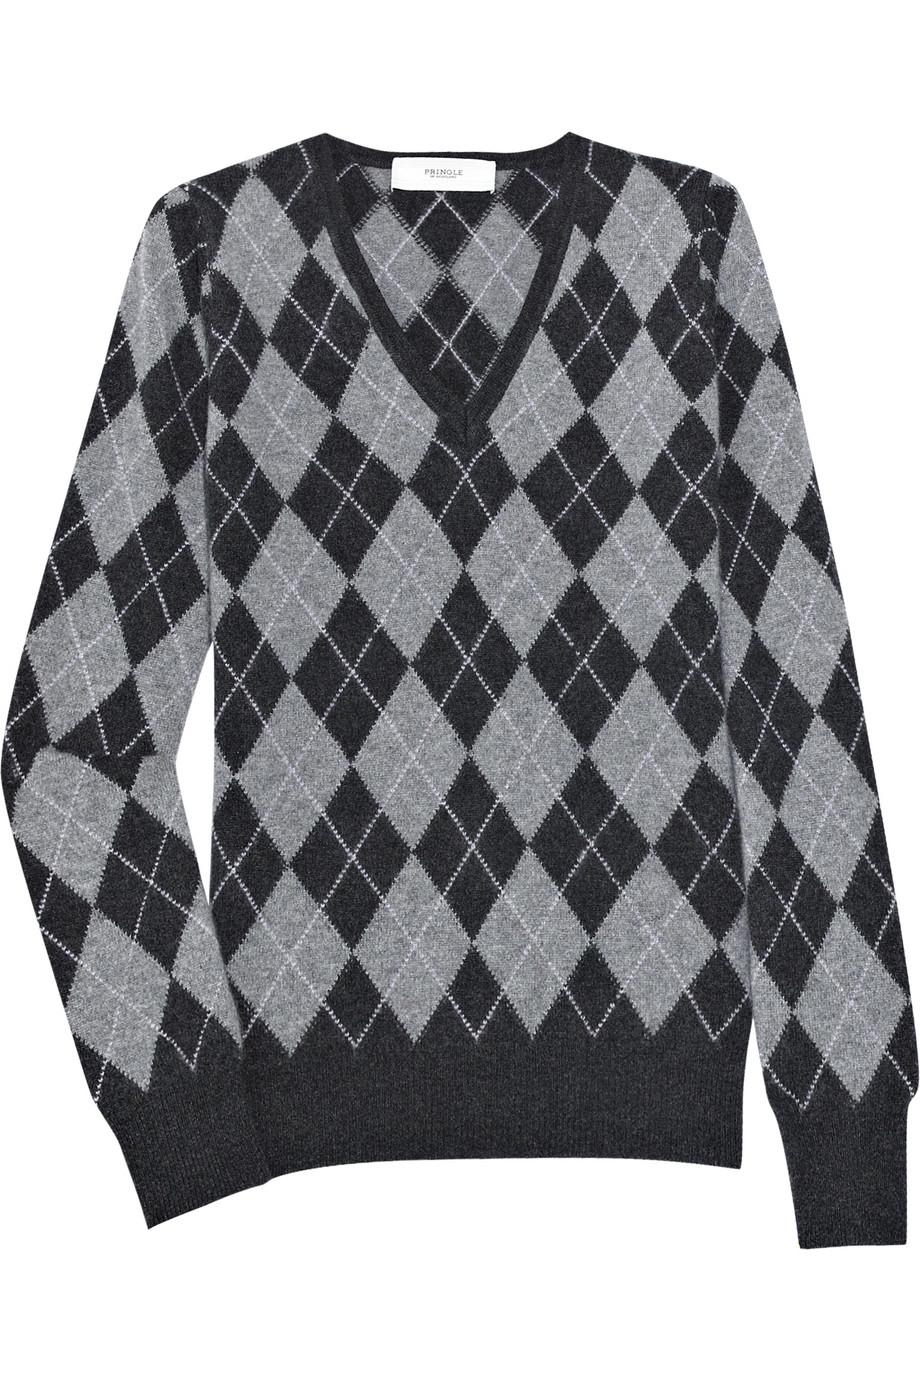 Pringle Of Scotland Cashmere Argyle Sweater in Gray | Lyst